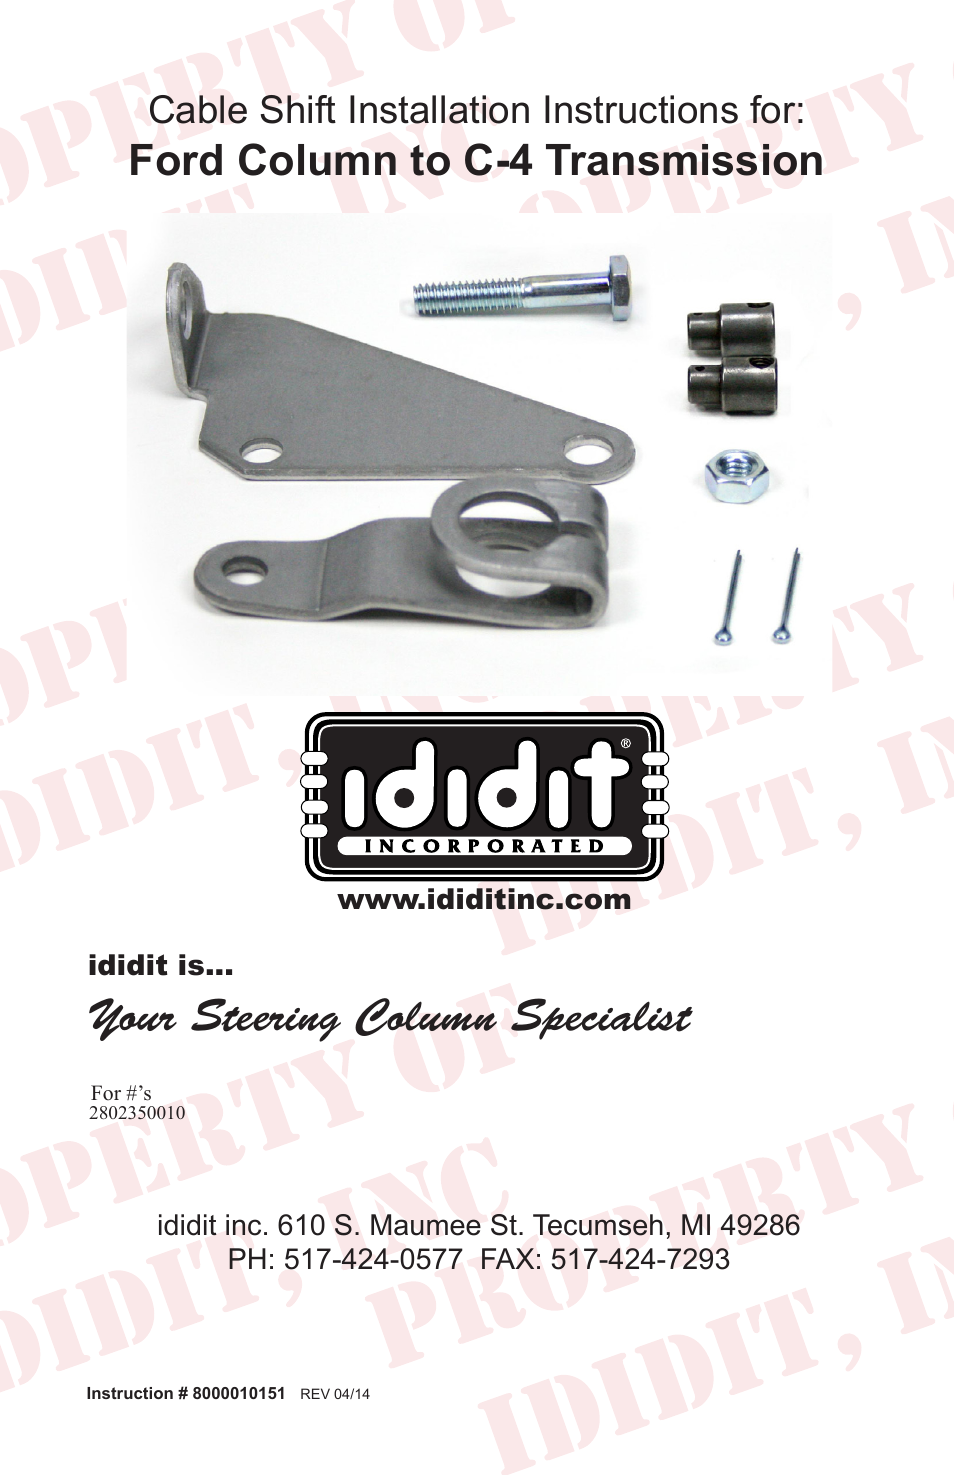 Cable Shift Linkage Kit: Ford Column to Ford C-4 Transmission